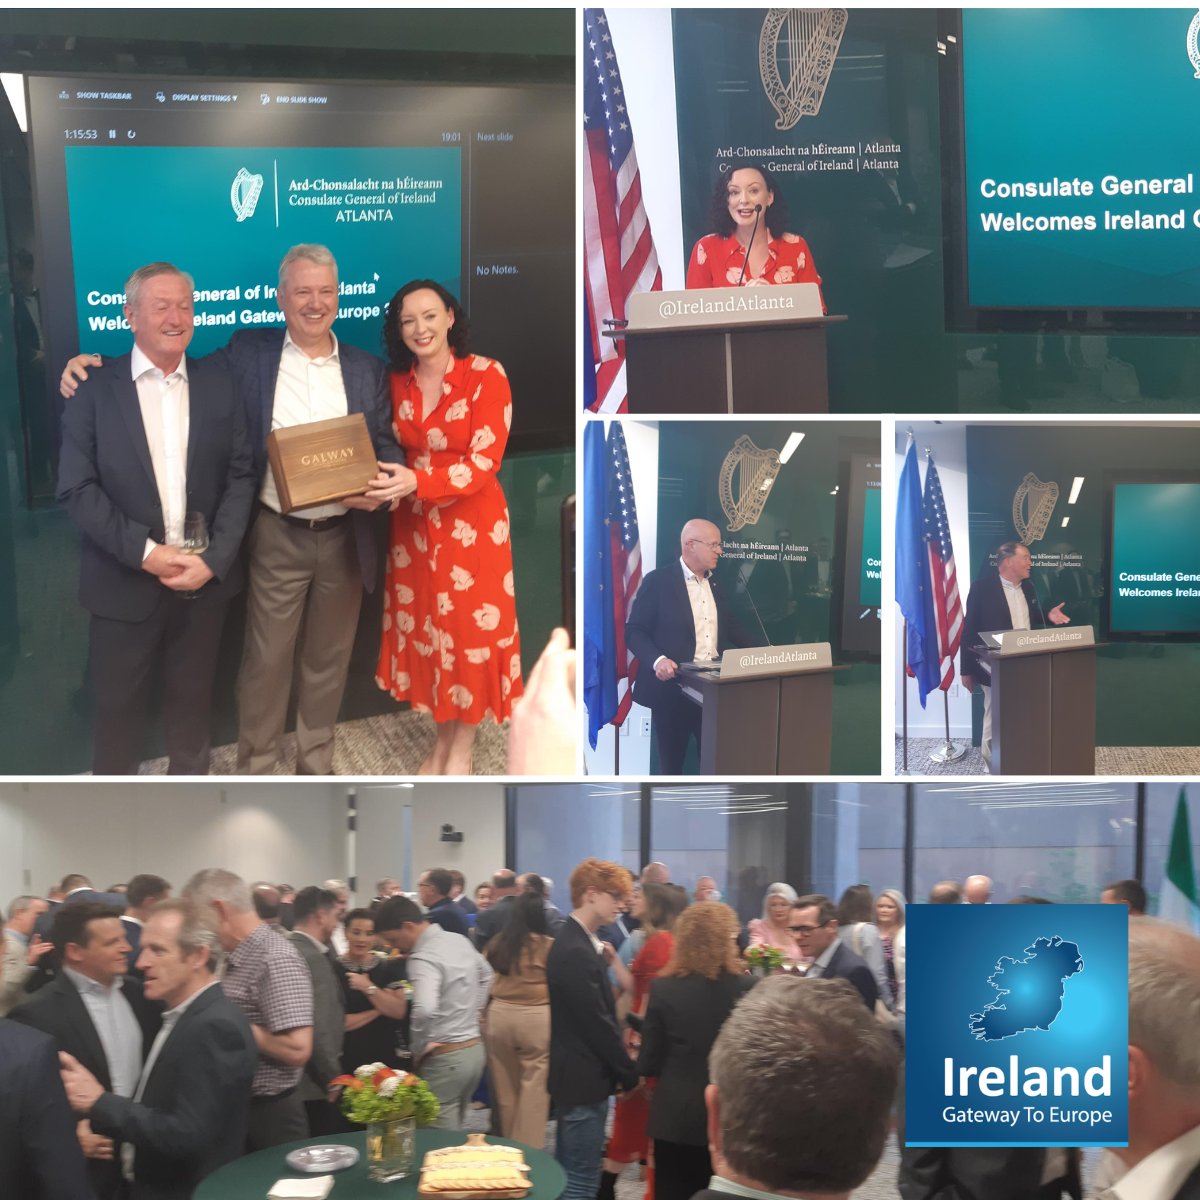 What a great start to our week in the US! Thanks to @CGATLIreland @IrelandAtlanta for hosting us last night for our first event of the week stateside. Great to meet the local Atlanta Business community and make new connections #whyirleand #investinireland #gatewaytoeurope